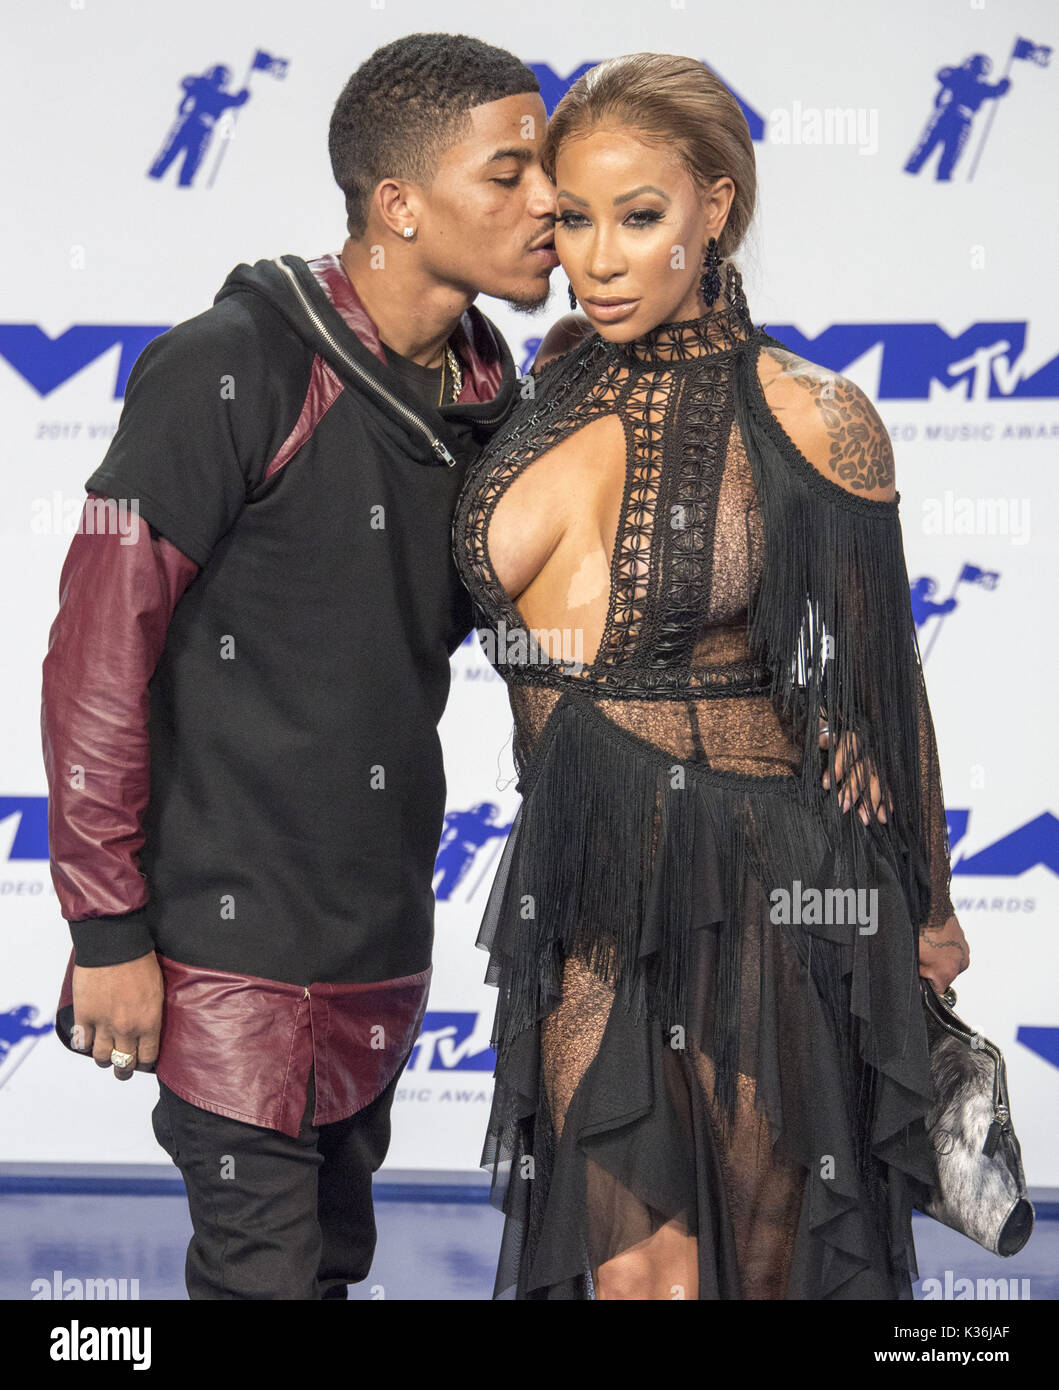 Inglewood, California, USA. 27th Aug, 2017. Hazel E and Rose Burgundy  arrives at the 2017 MTV Video Music Awards Photo Room held at The Forum in  Inglewood/Los Angeles on Sunday afternoon. Credit: